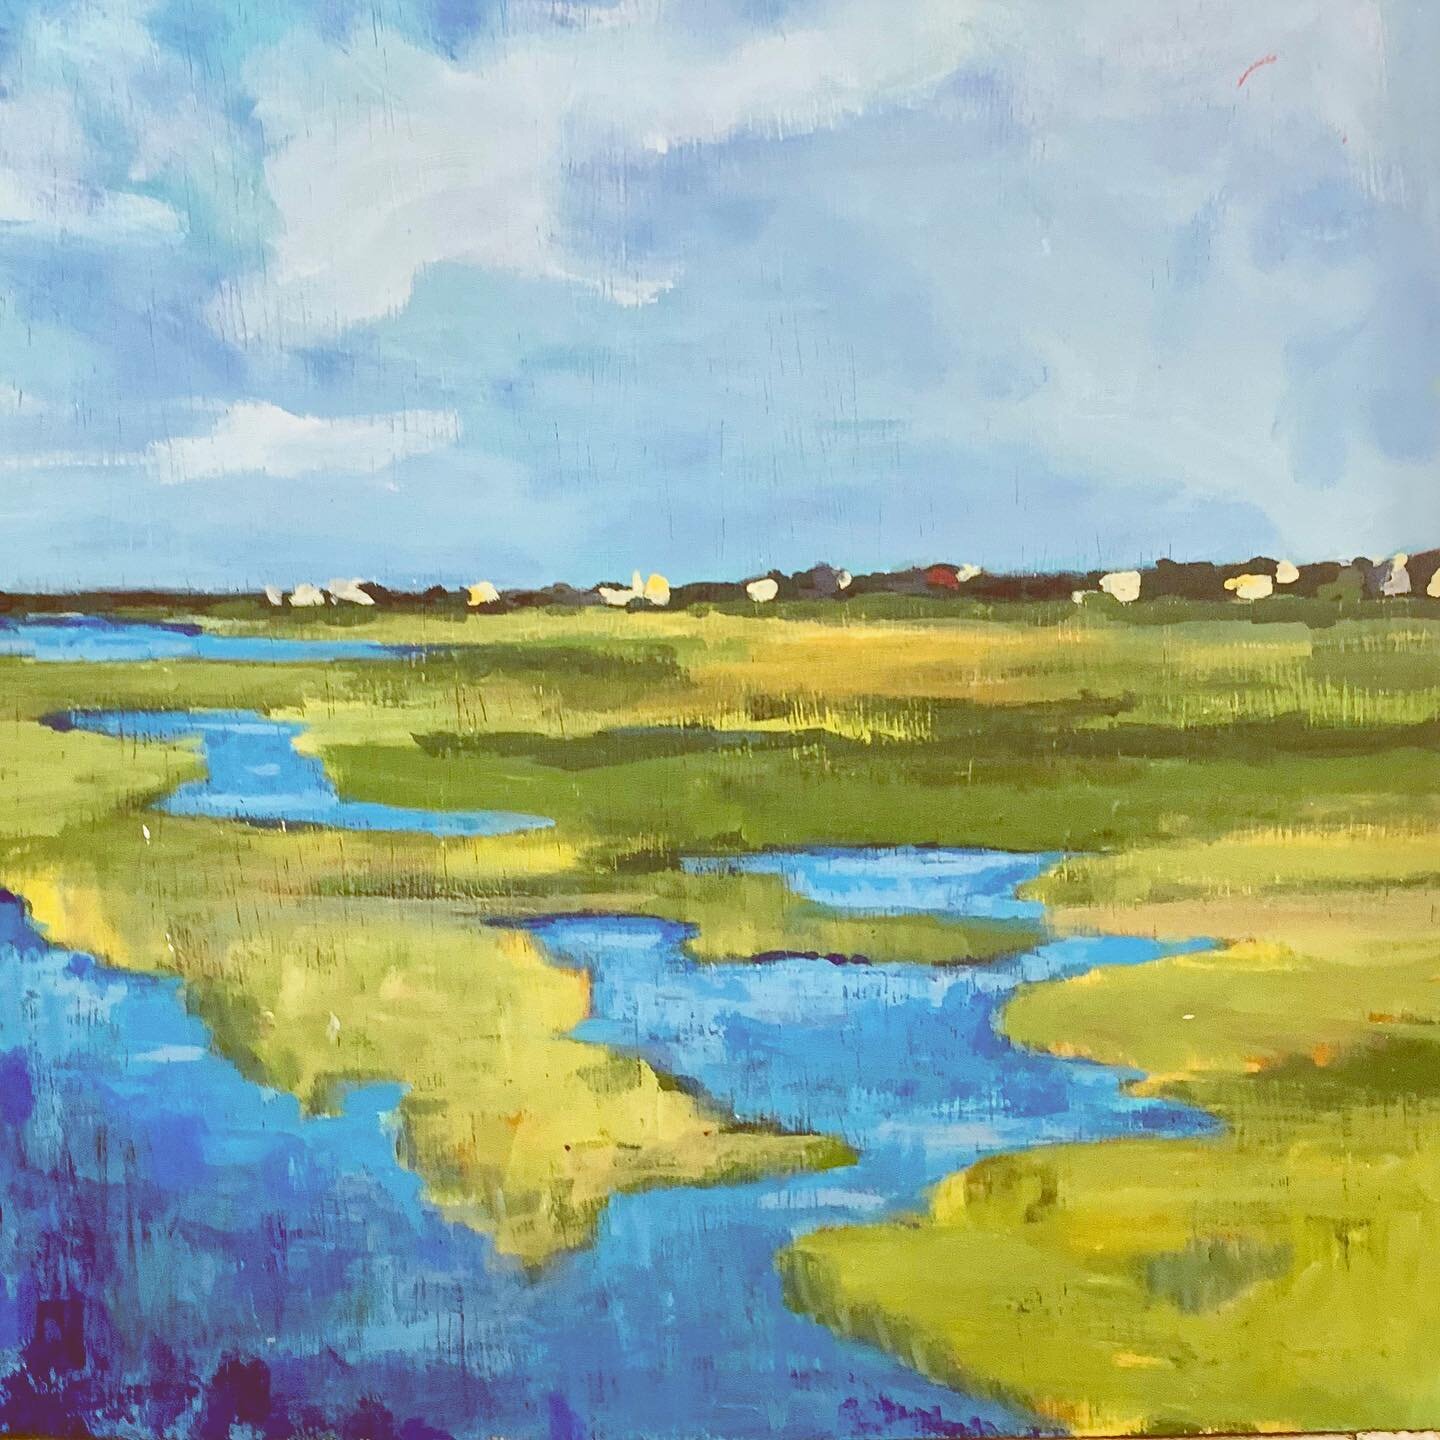 An old landscape from the spring.  I like painting on these boards!  North Shore Marsh.  12x12 acrylic on wood board.  #acrylicpainting #acrylic #landscapeart #landscapes #sowaboston